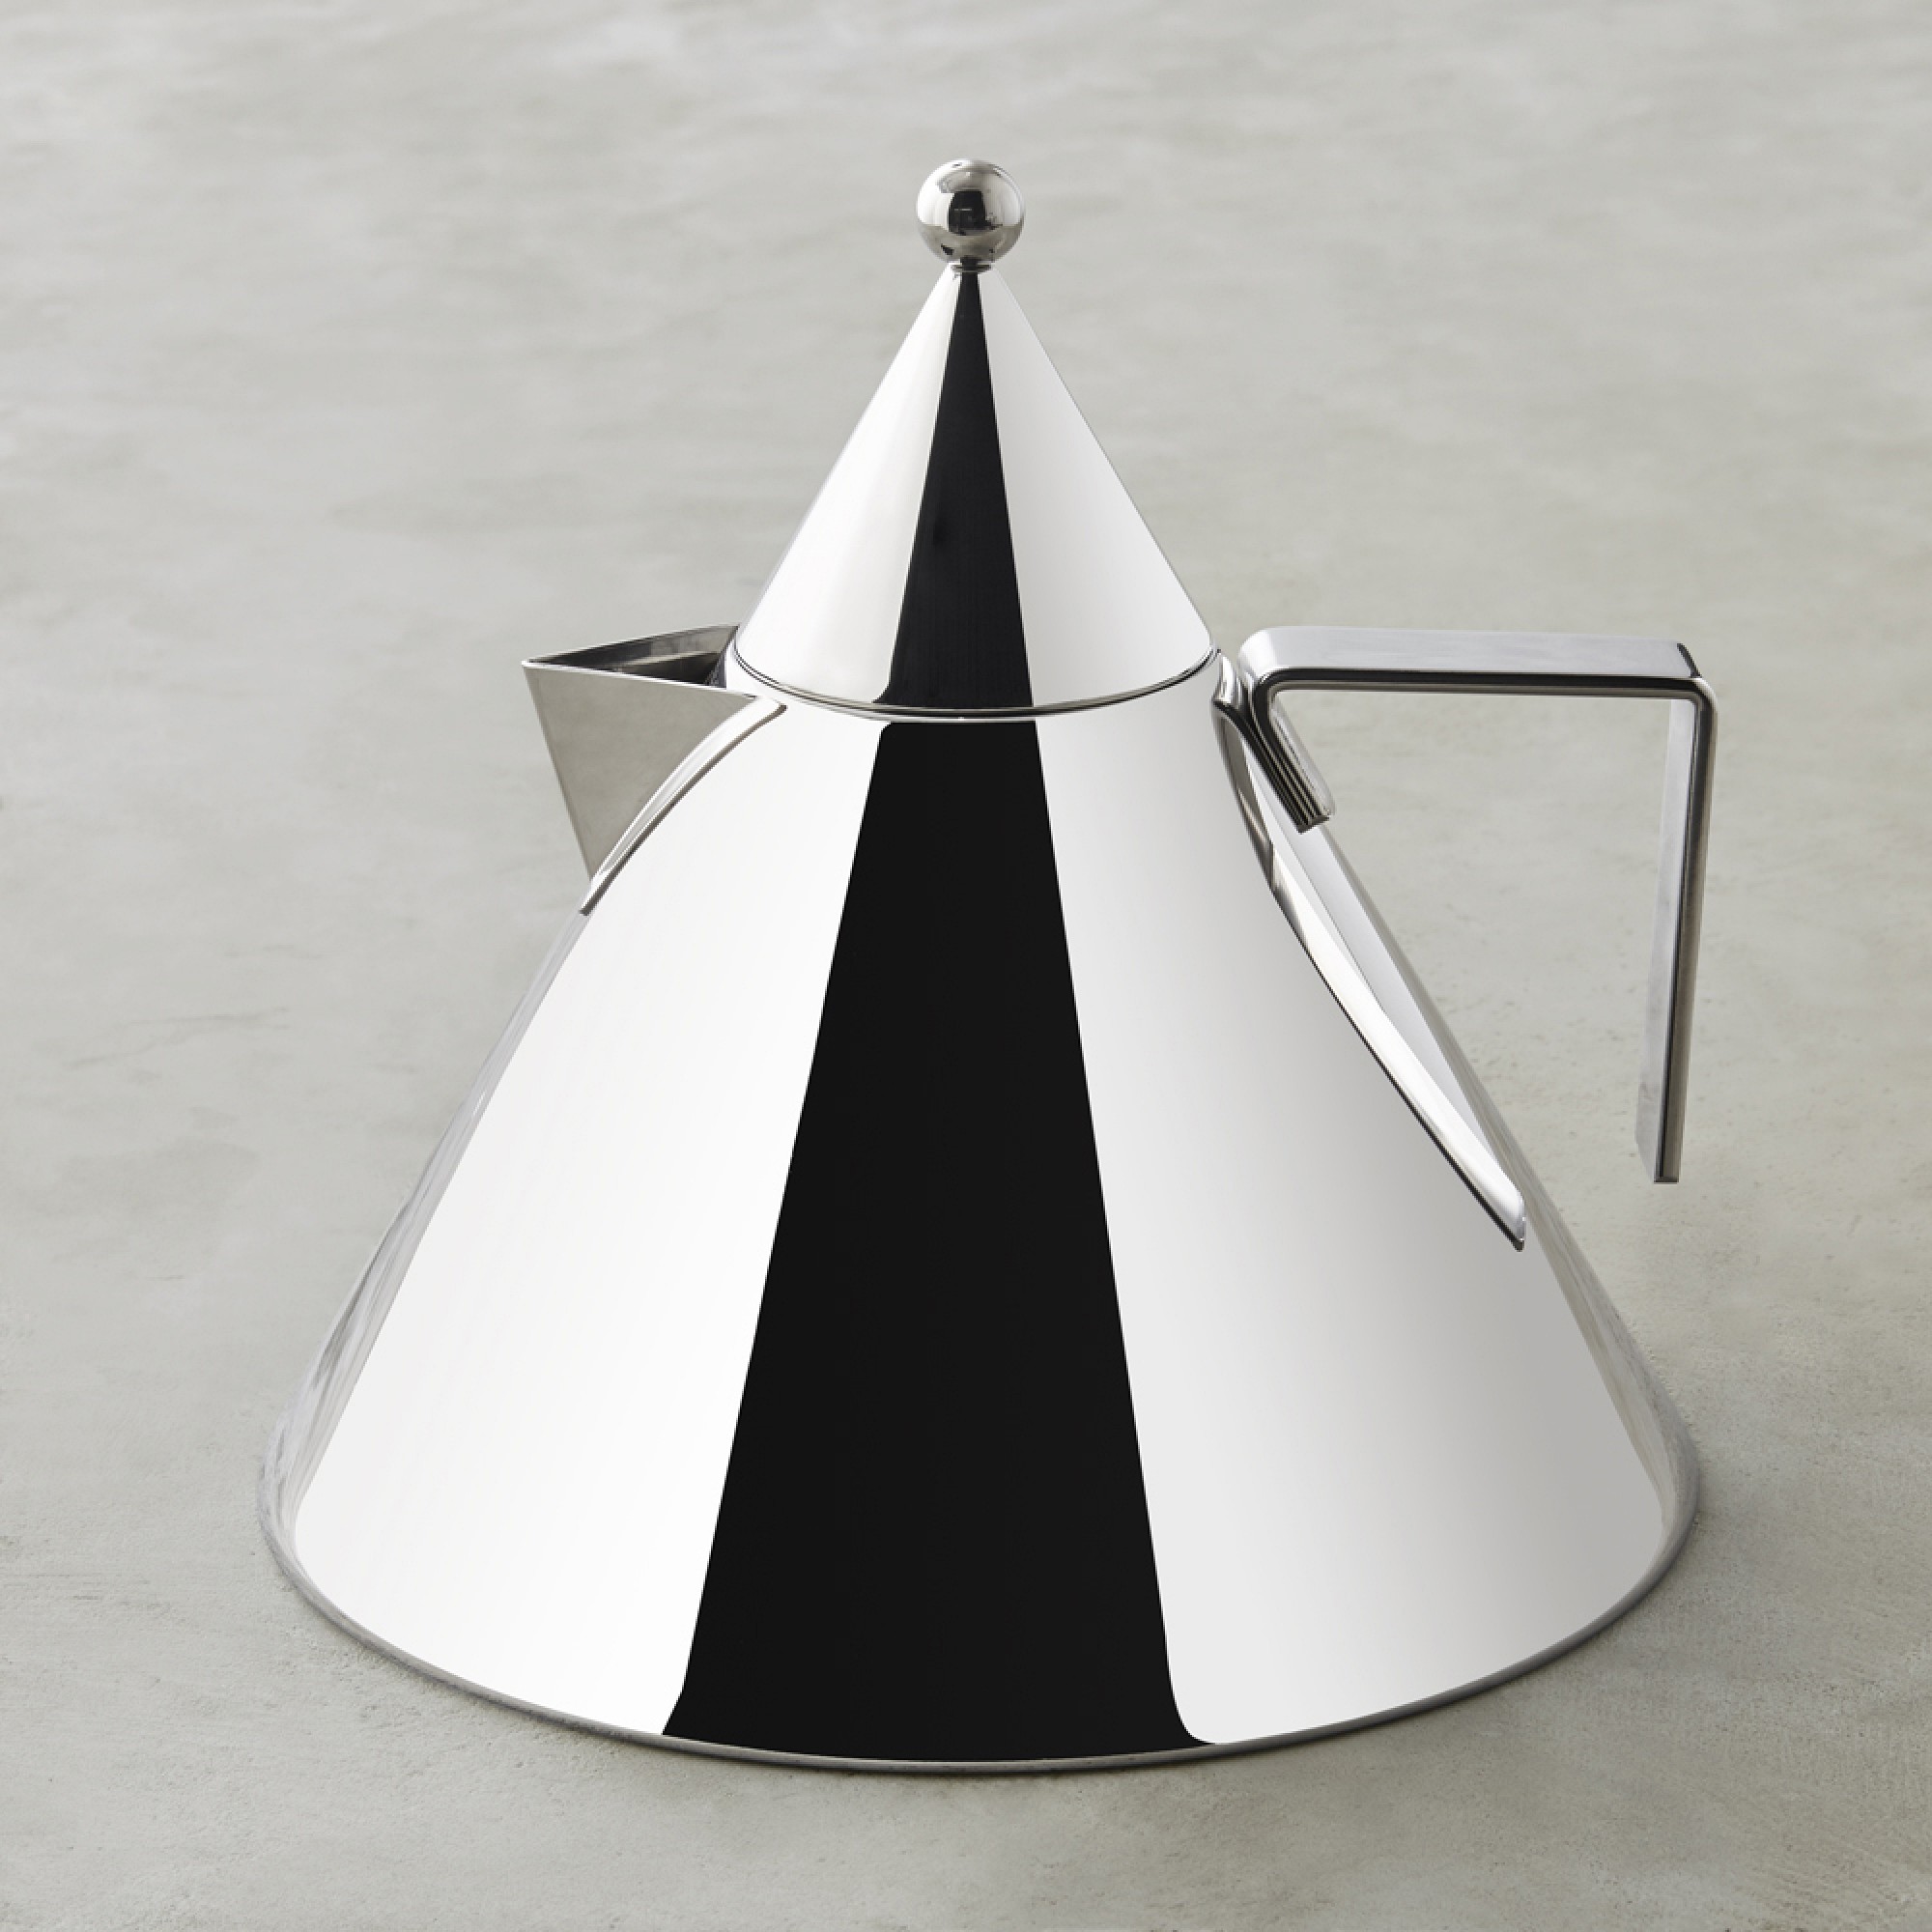 Alessi II Conico Stainless-Steel Tea Kettle, 2-Qt.